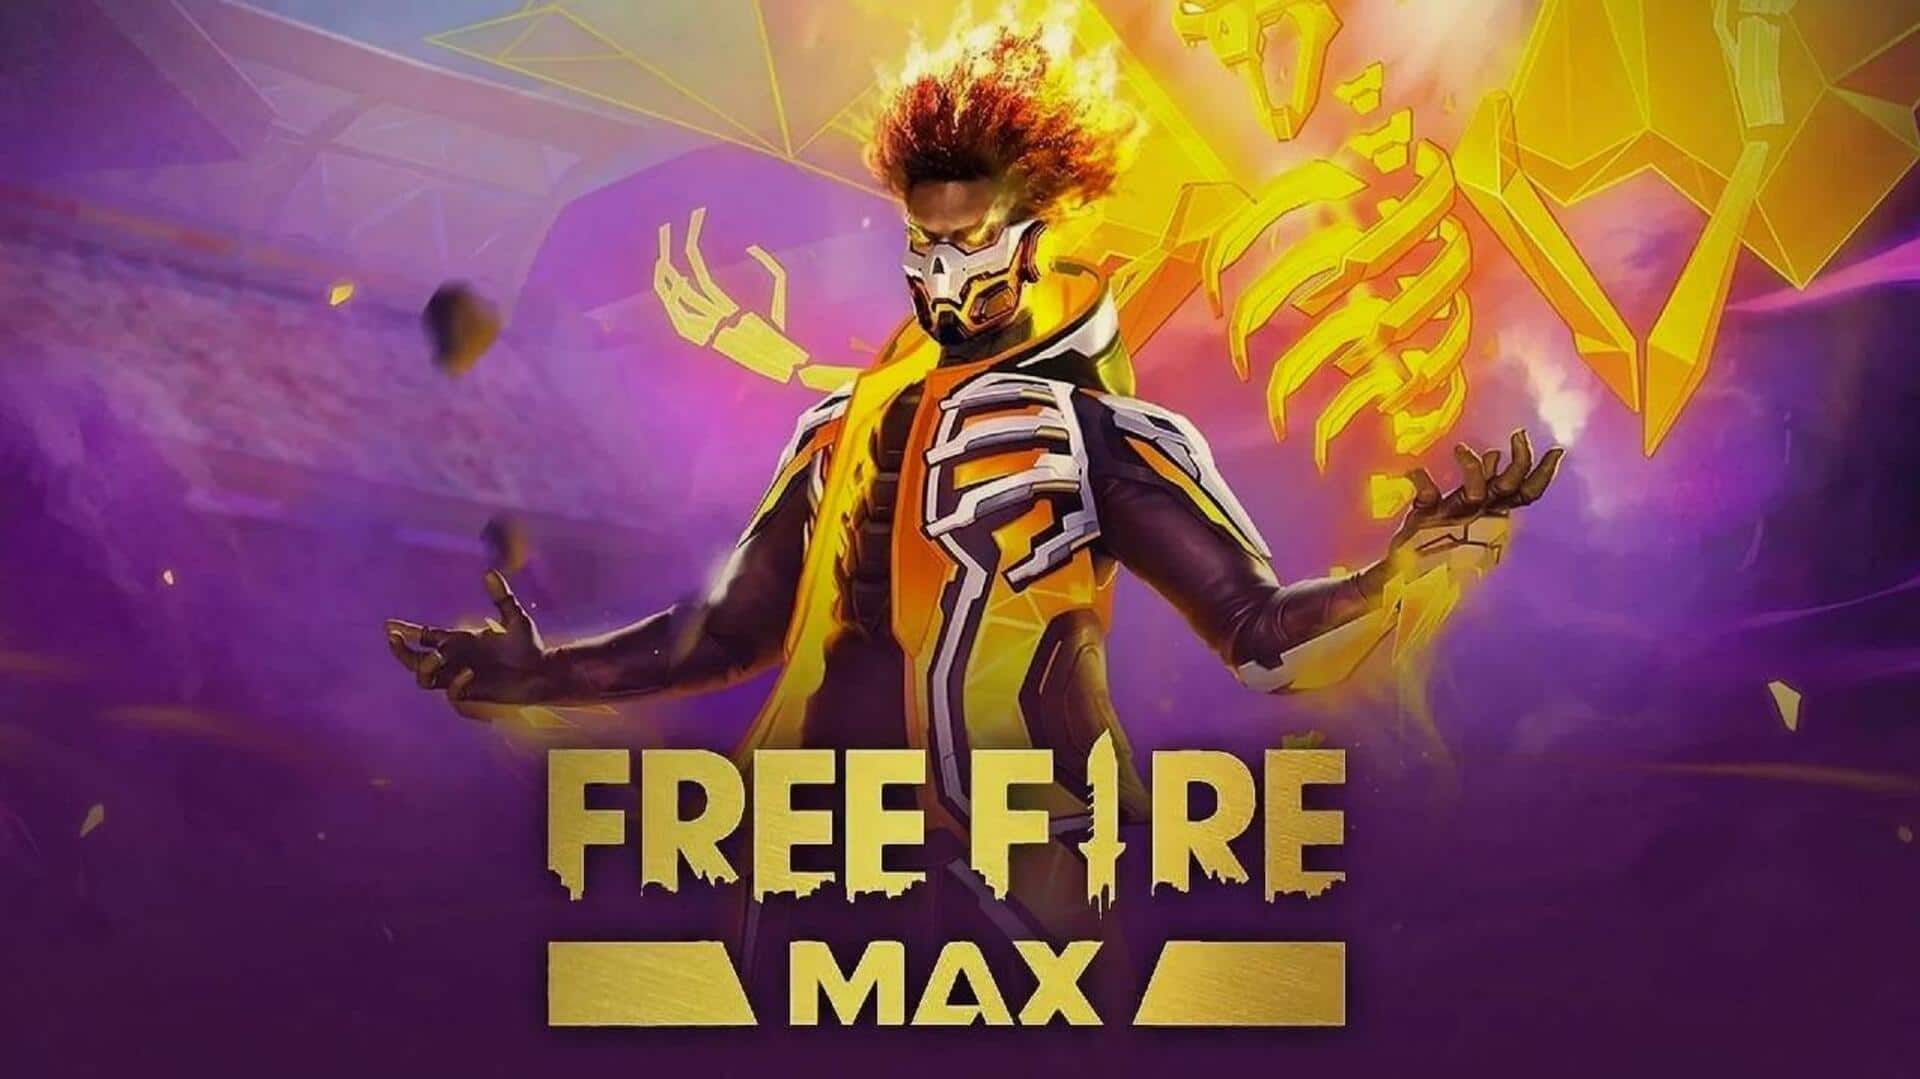 Garena Free Fire MAX codes for November 5: Redeem now